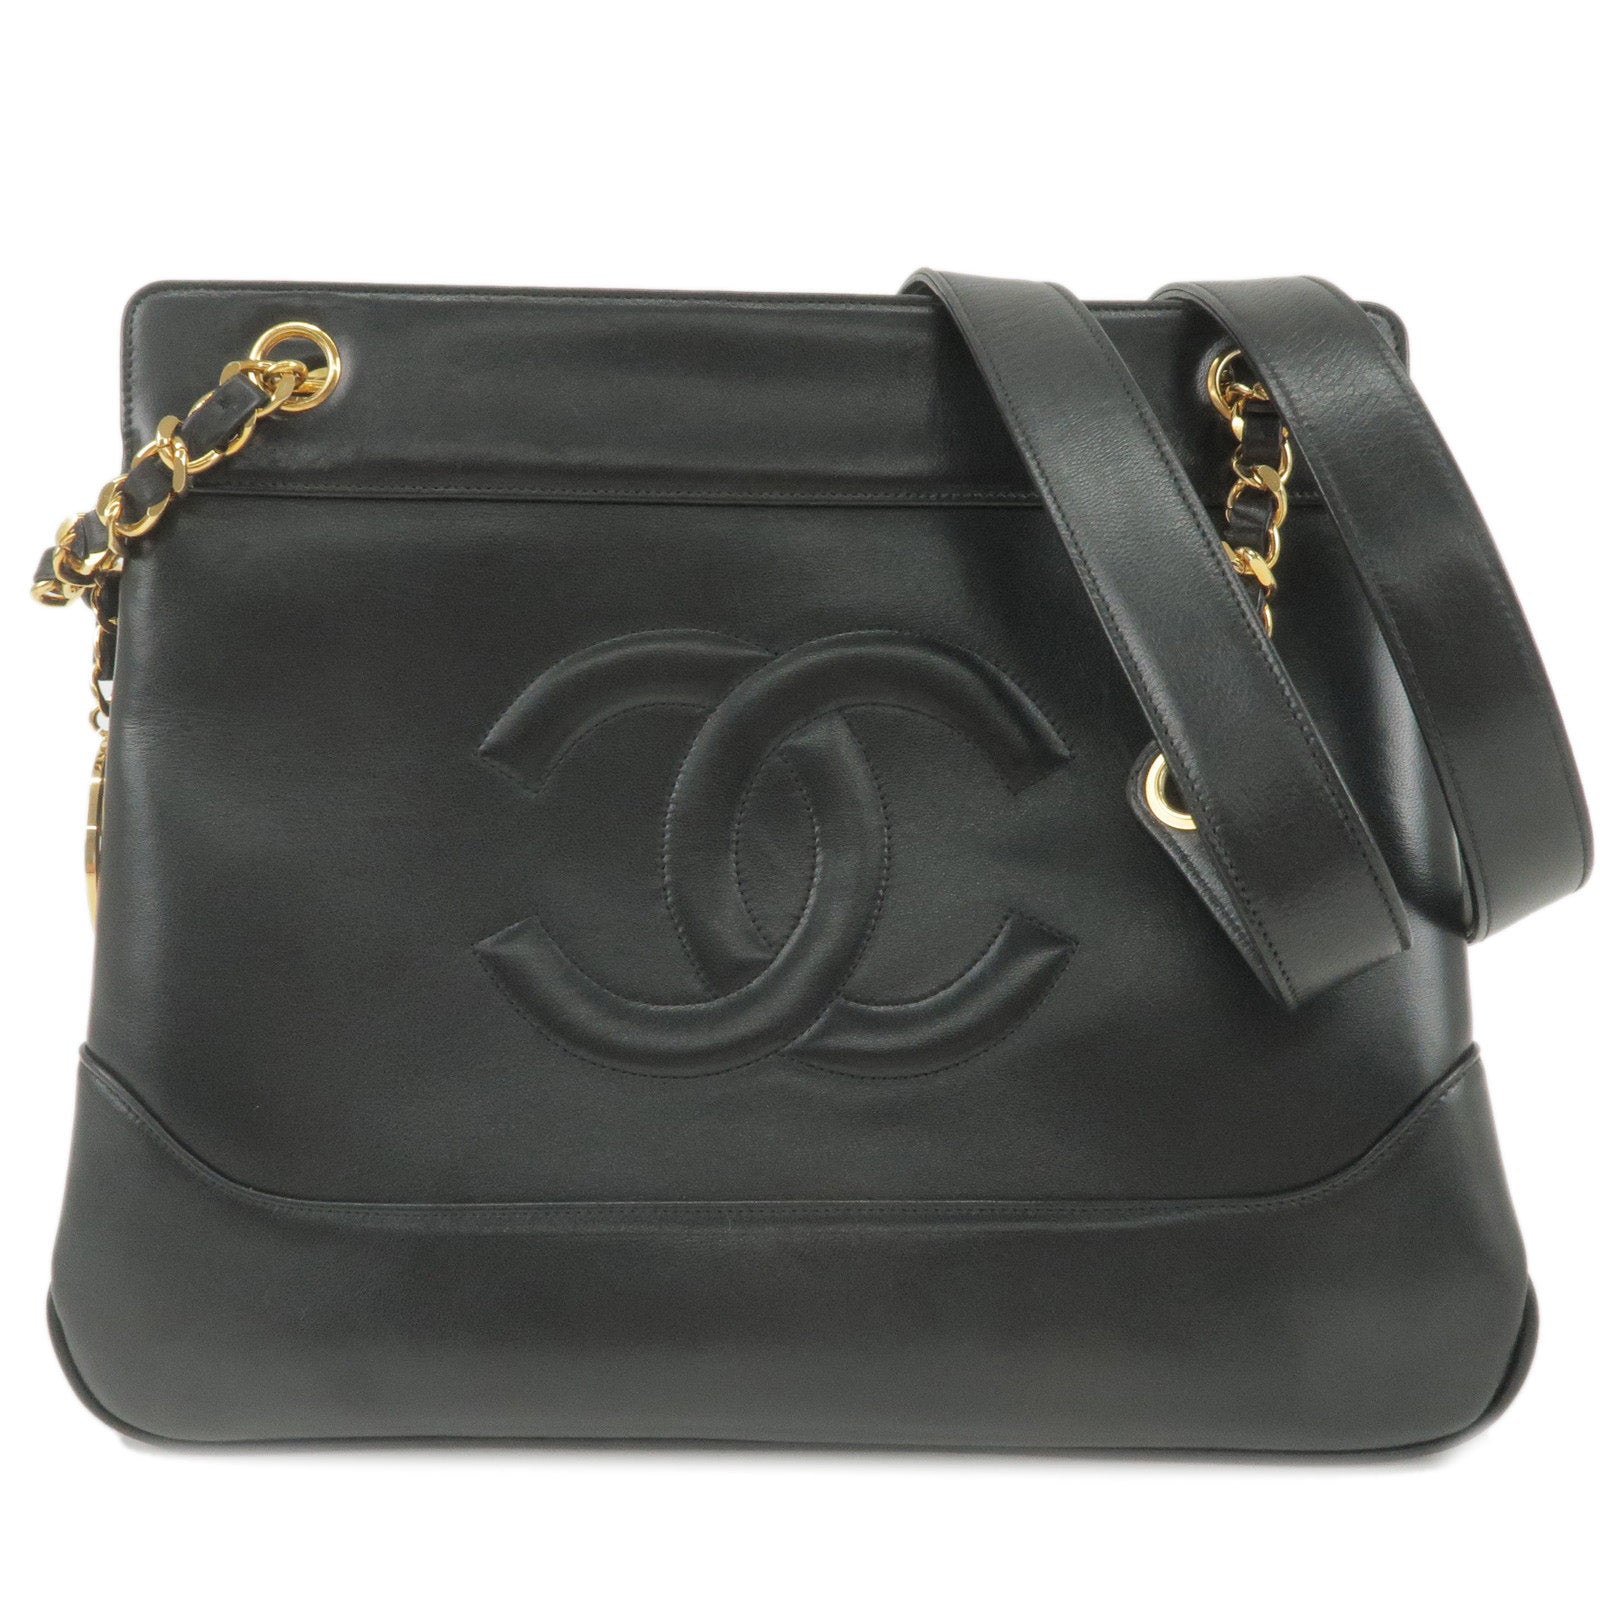 Chanel Tote Bags - Lampoo